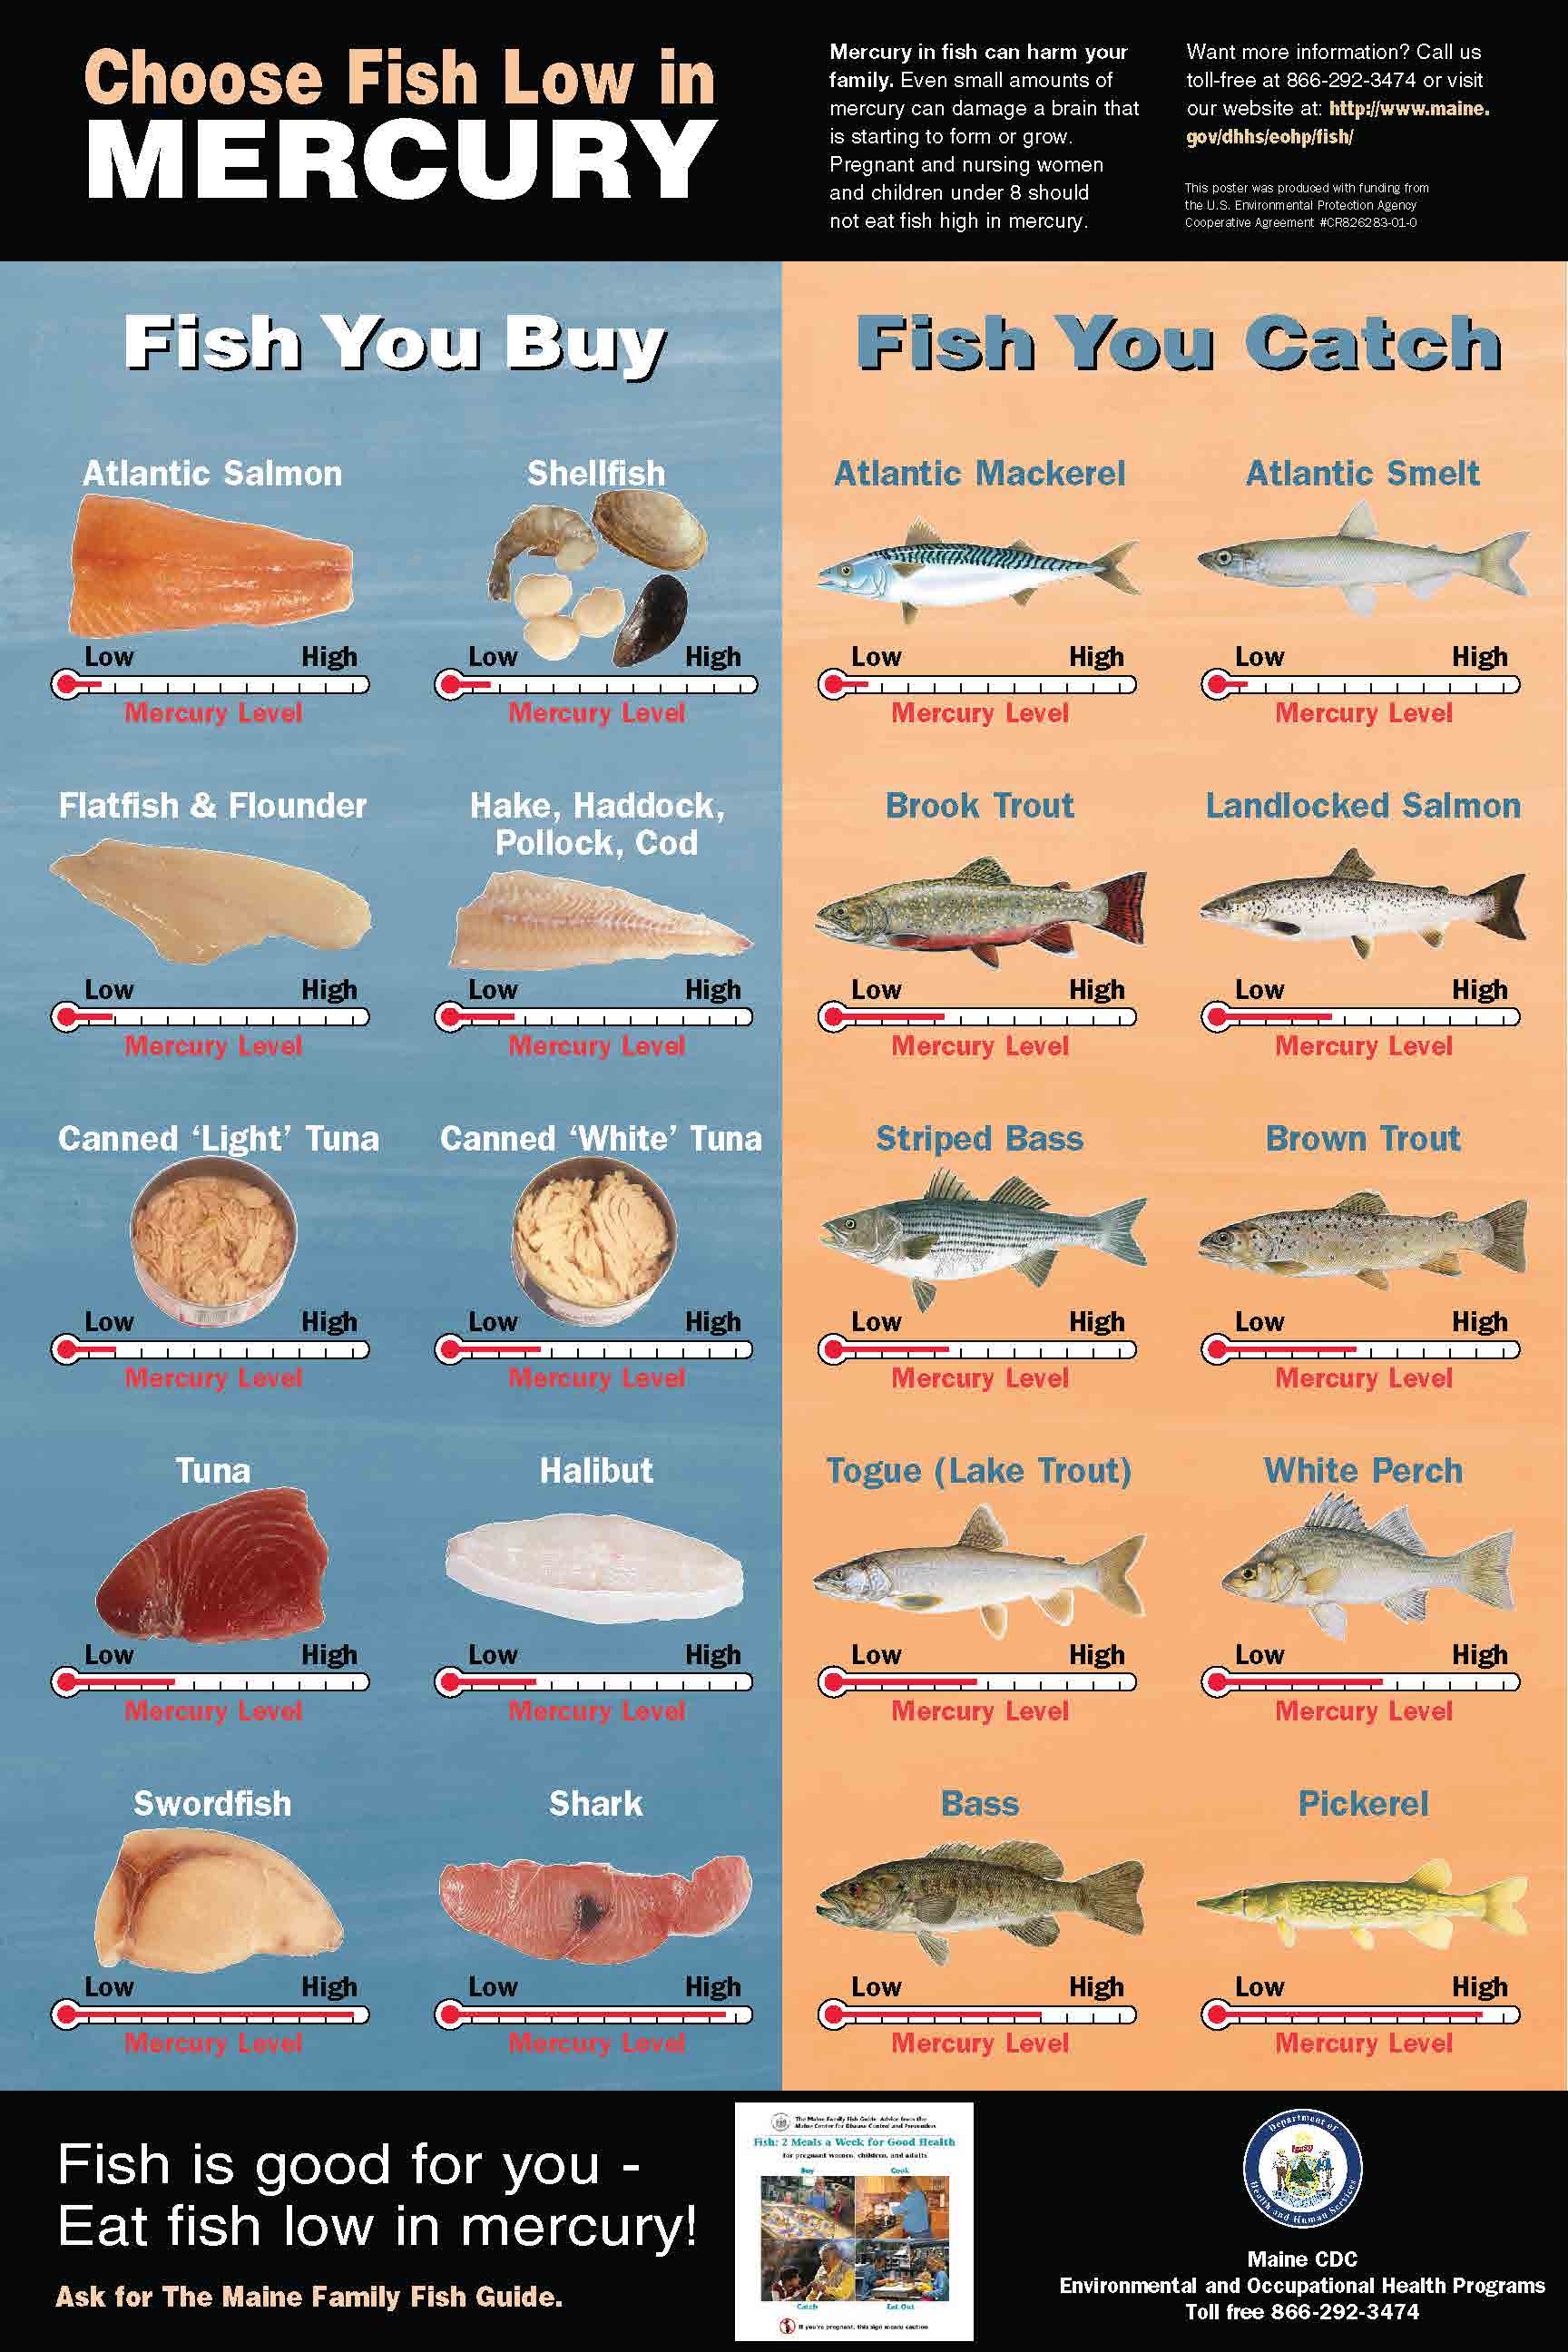 this poster shows mercury levels for different kinds of fish